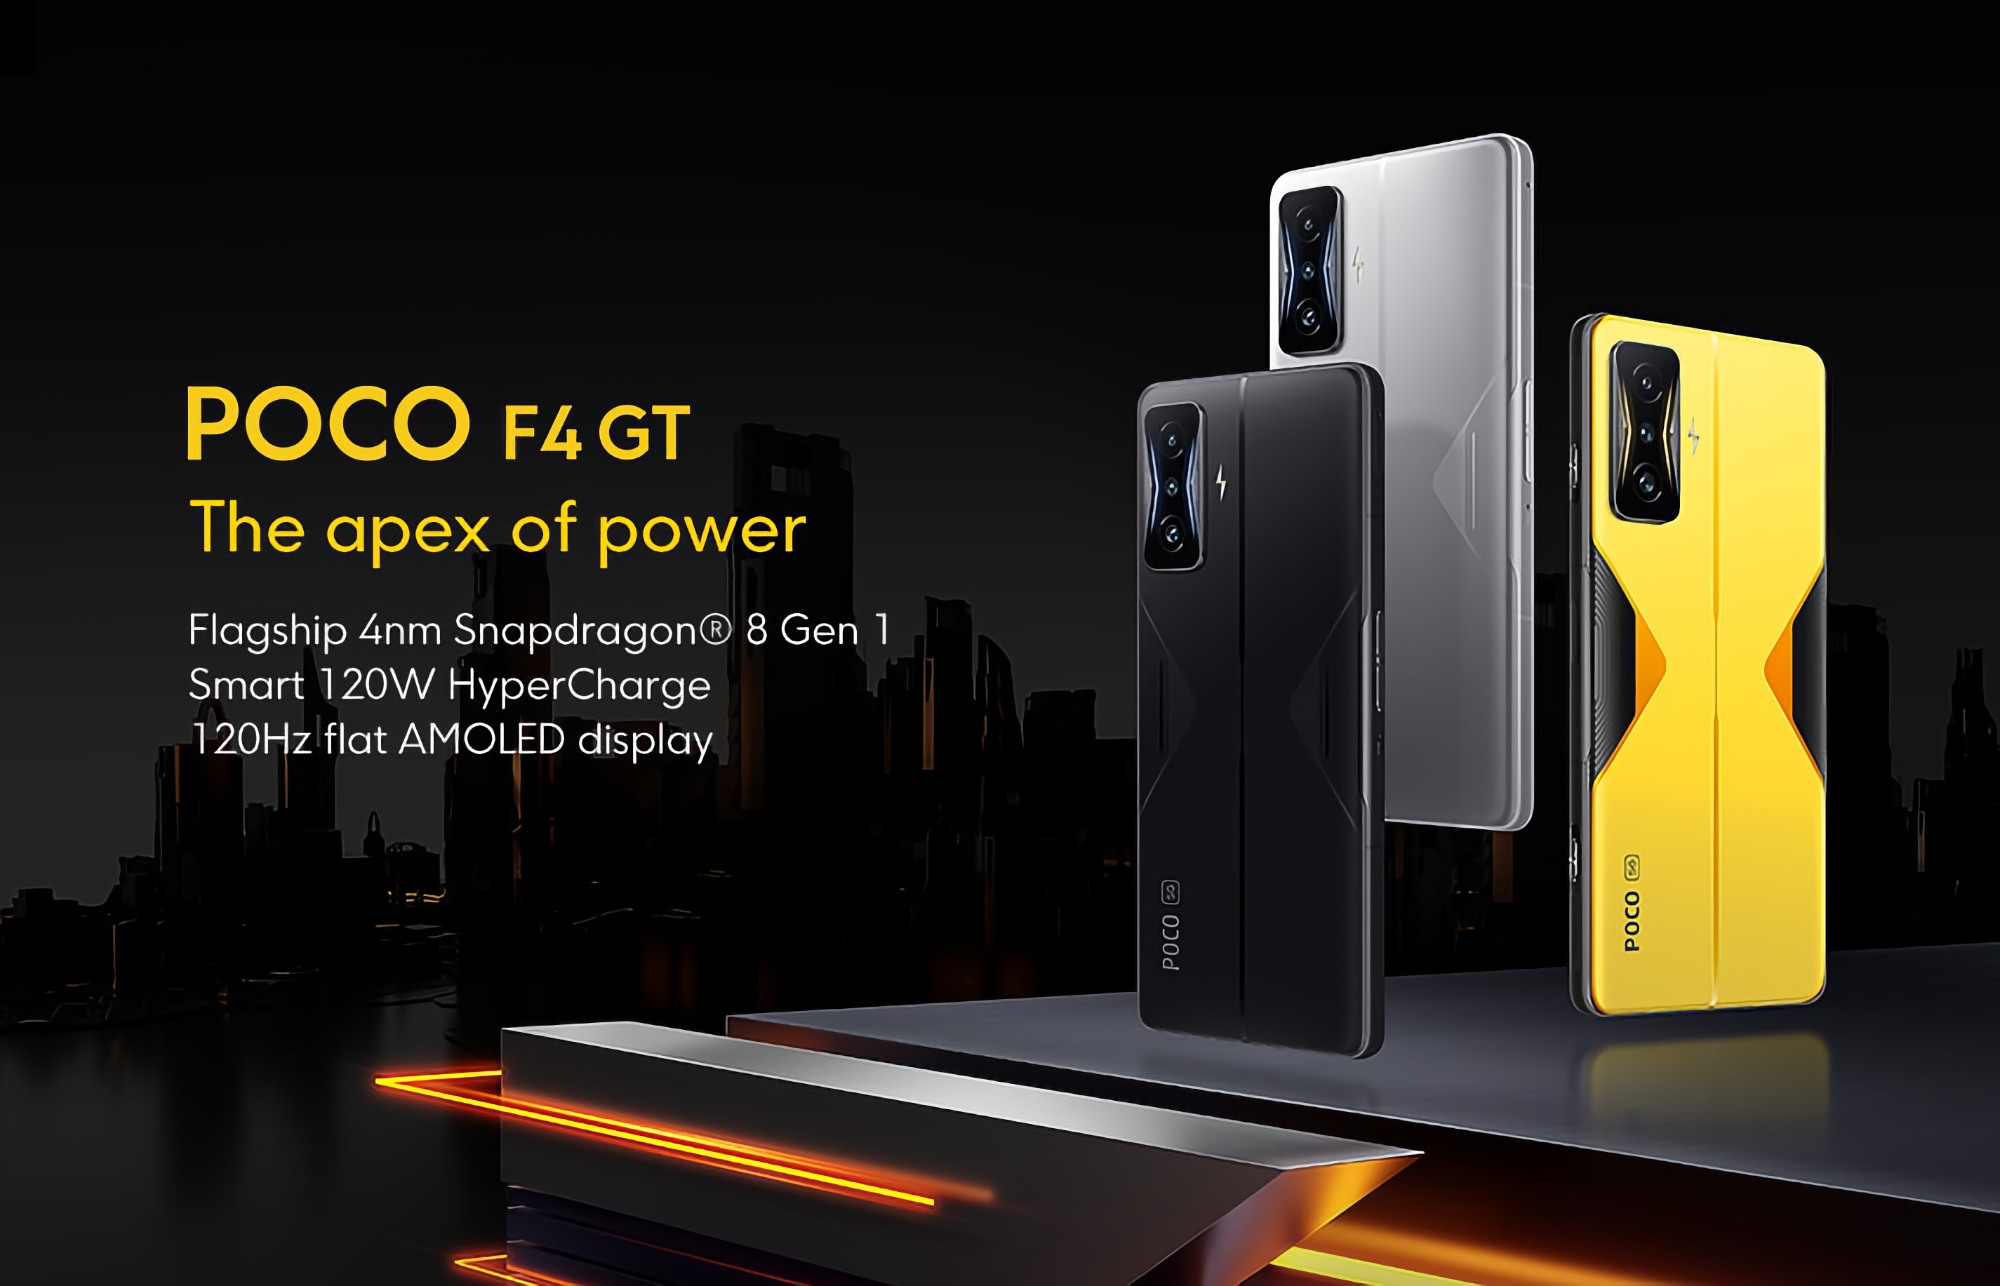 POCO F4 GT 5G world premiere on AliExpress: gaming smartphone with Snapdragon 8 Gen 1 chip at a promotional price